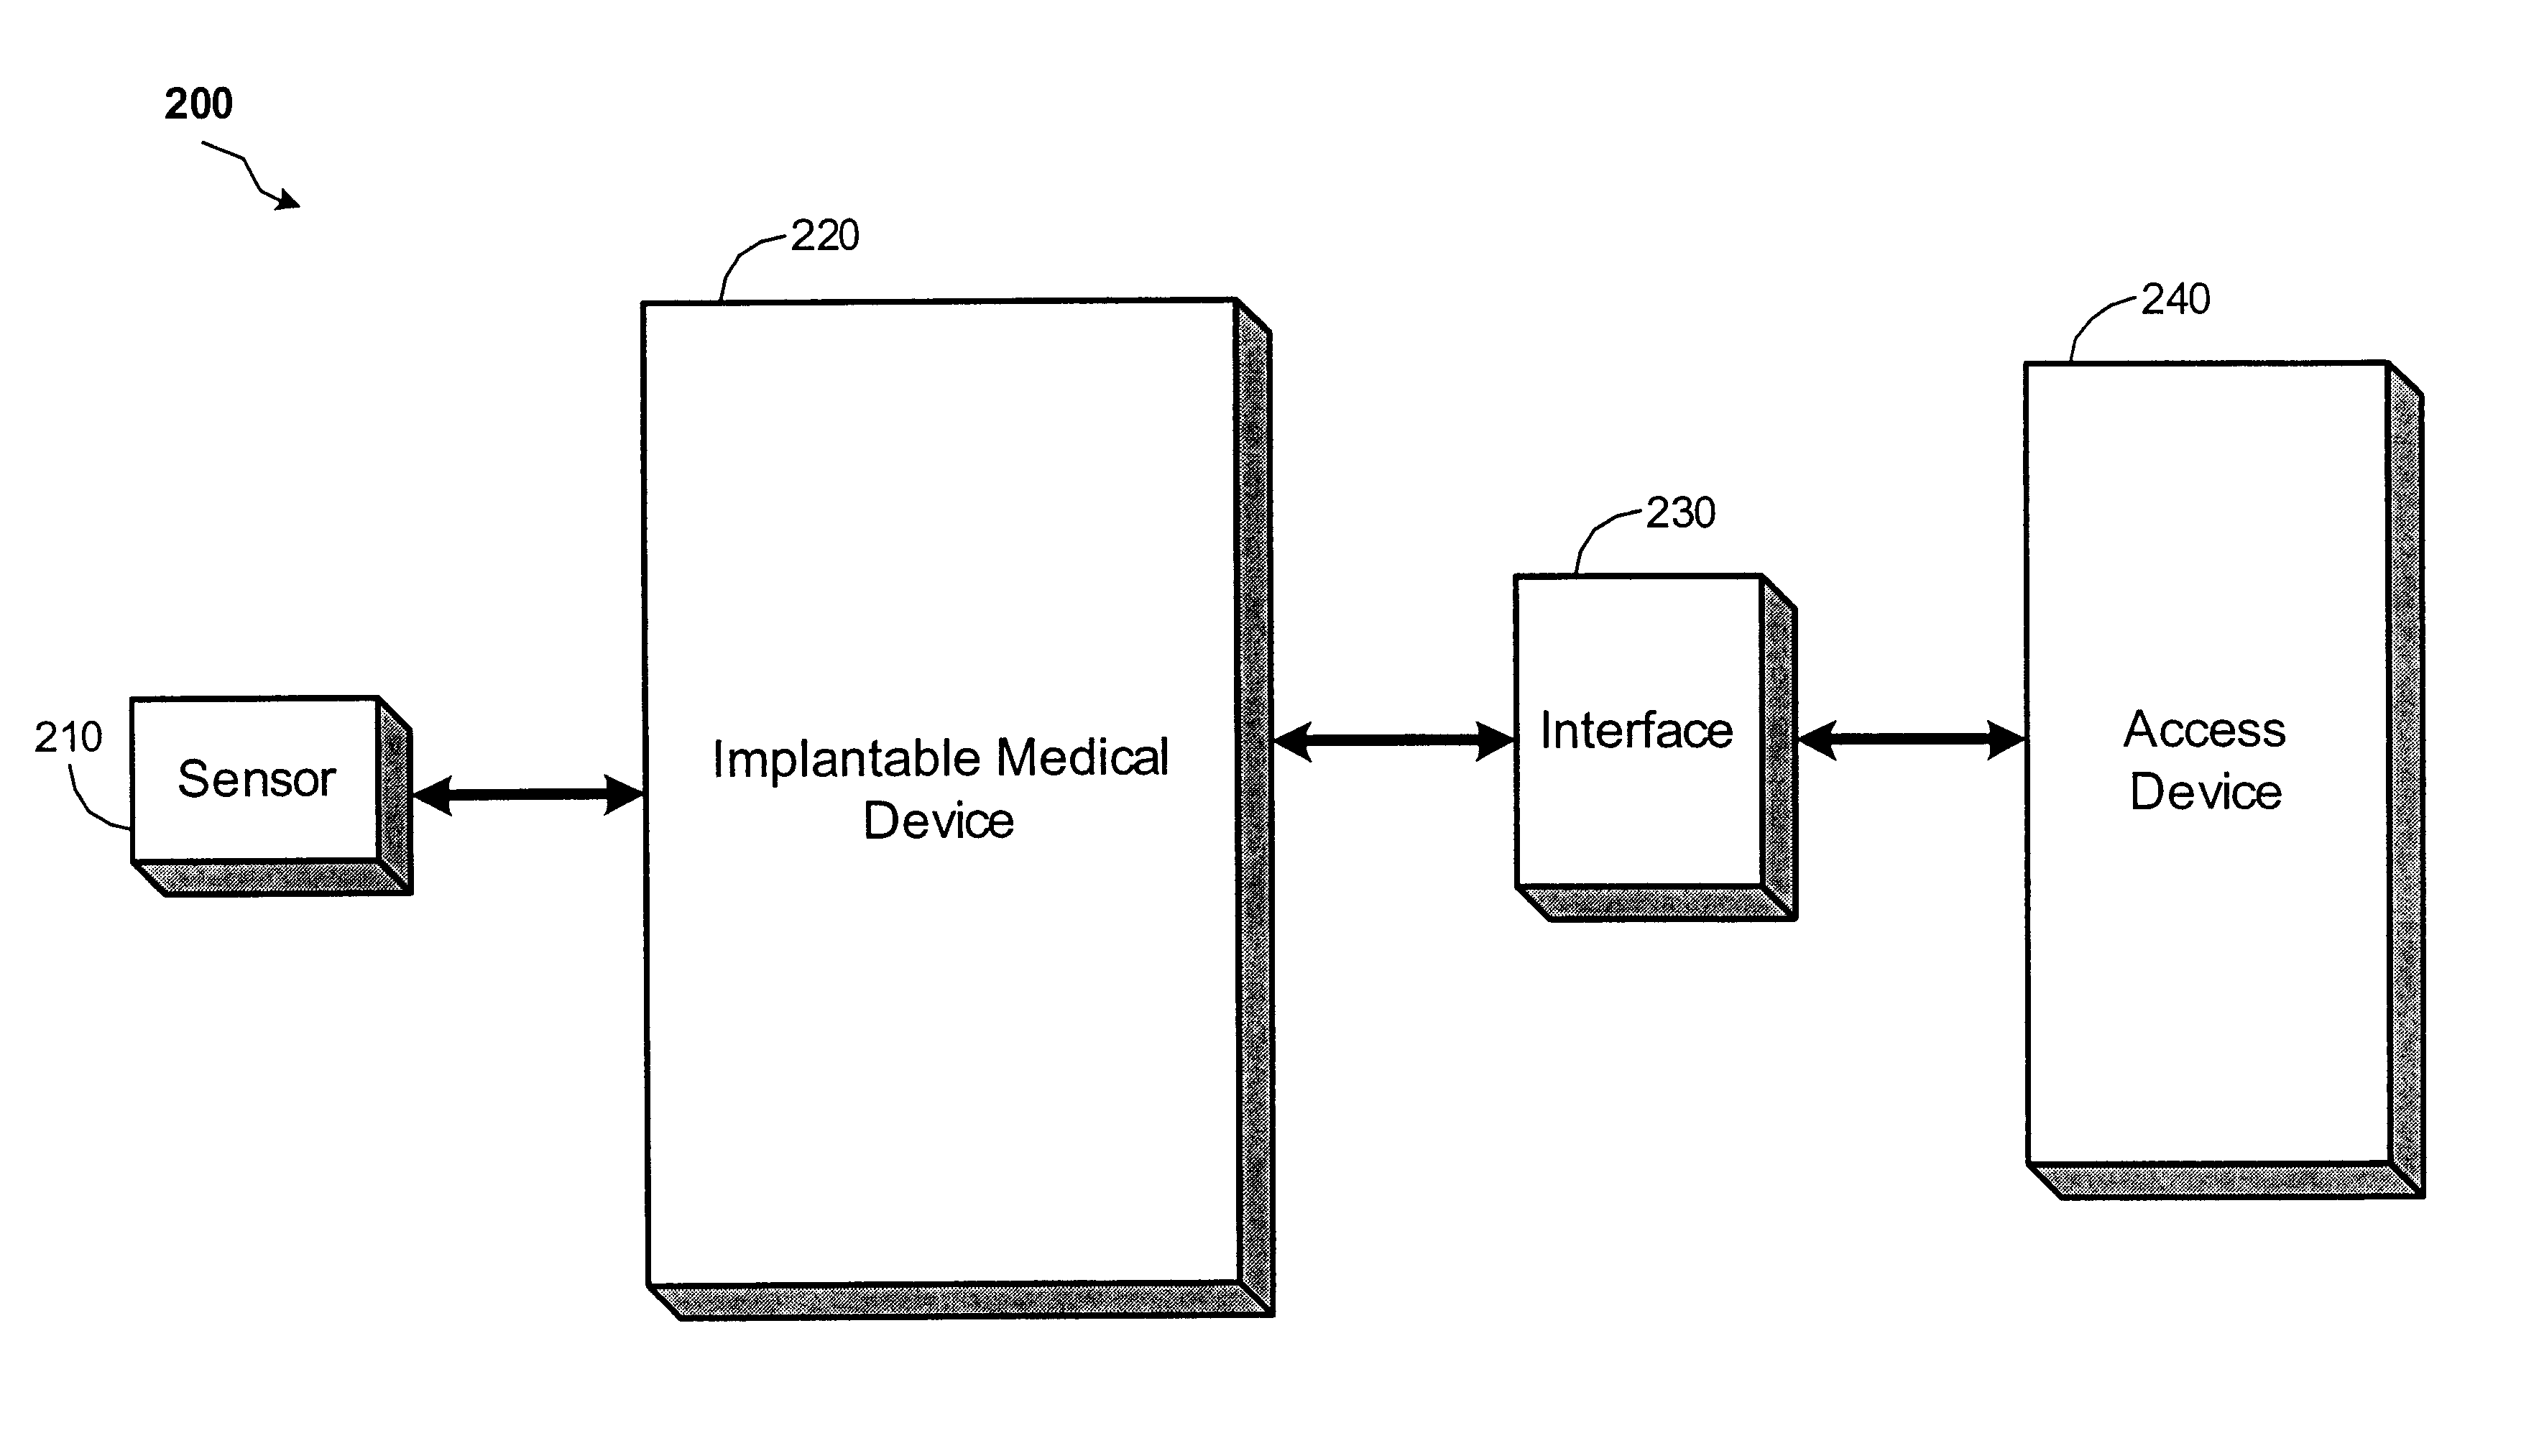 Method and apparatus to detect and treat sleep respiratory events